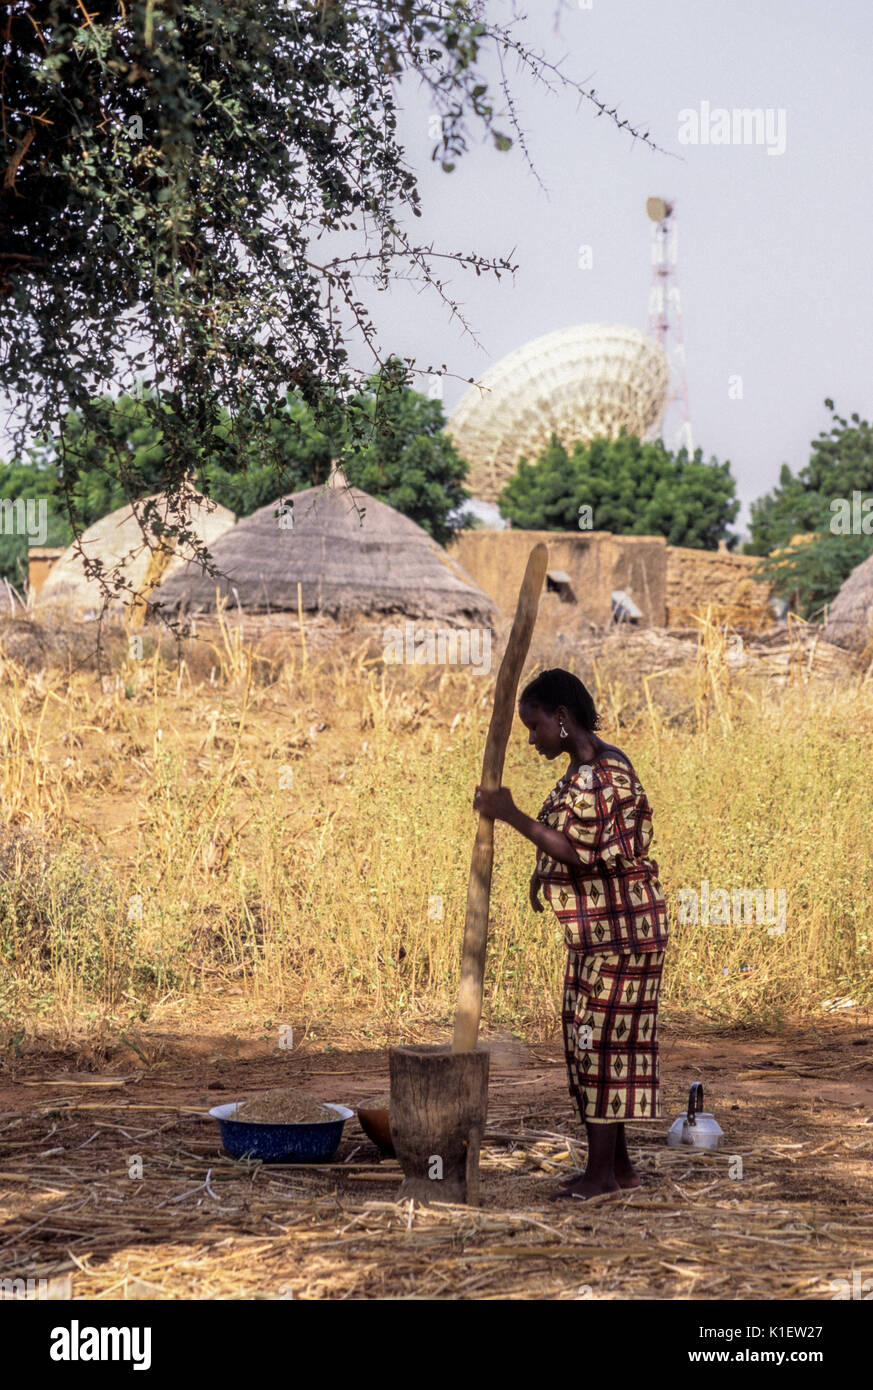 Niger, West Africa,  Woman Pounds Millet for Evening Meal.  Satellite Dish Transmitting Niger's International Telephone Calls is in Background. Stock Photo